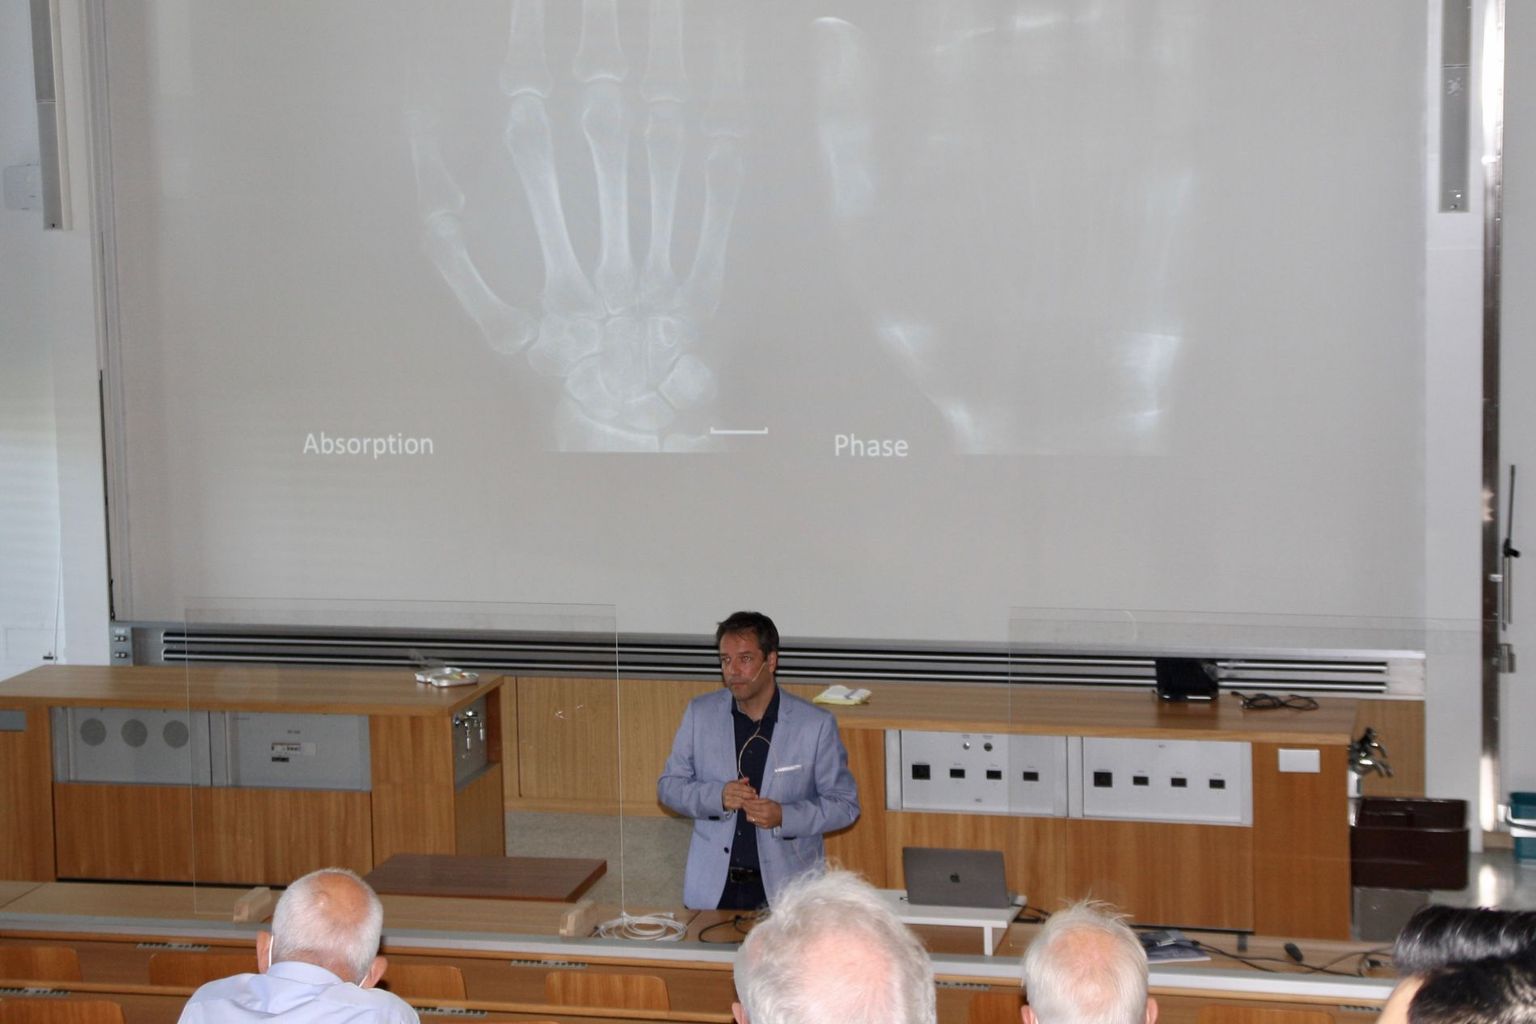 Prof. Marco Stampanoni presents at the Röntgen Symposium 2021 how X-ray phase analysis complements absorption images.